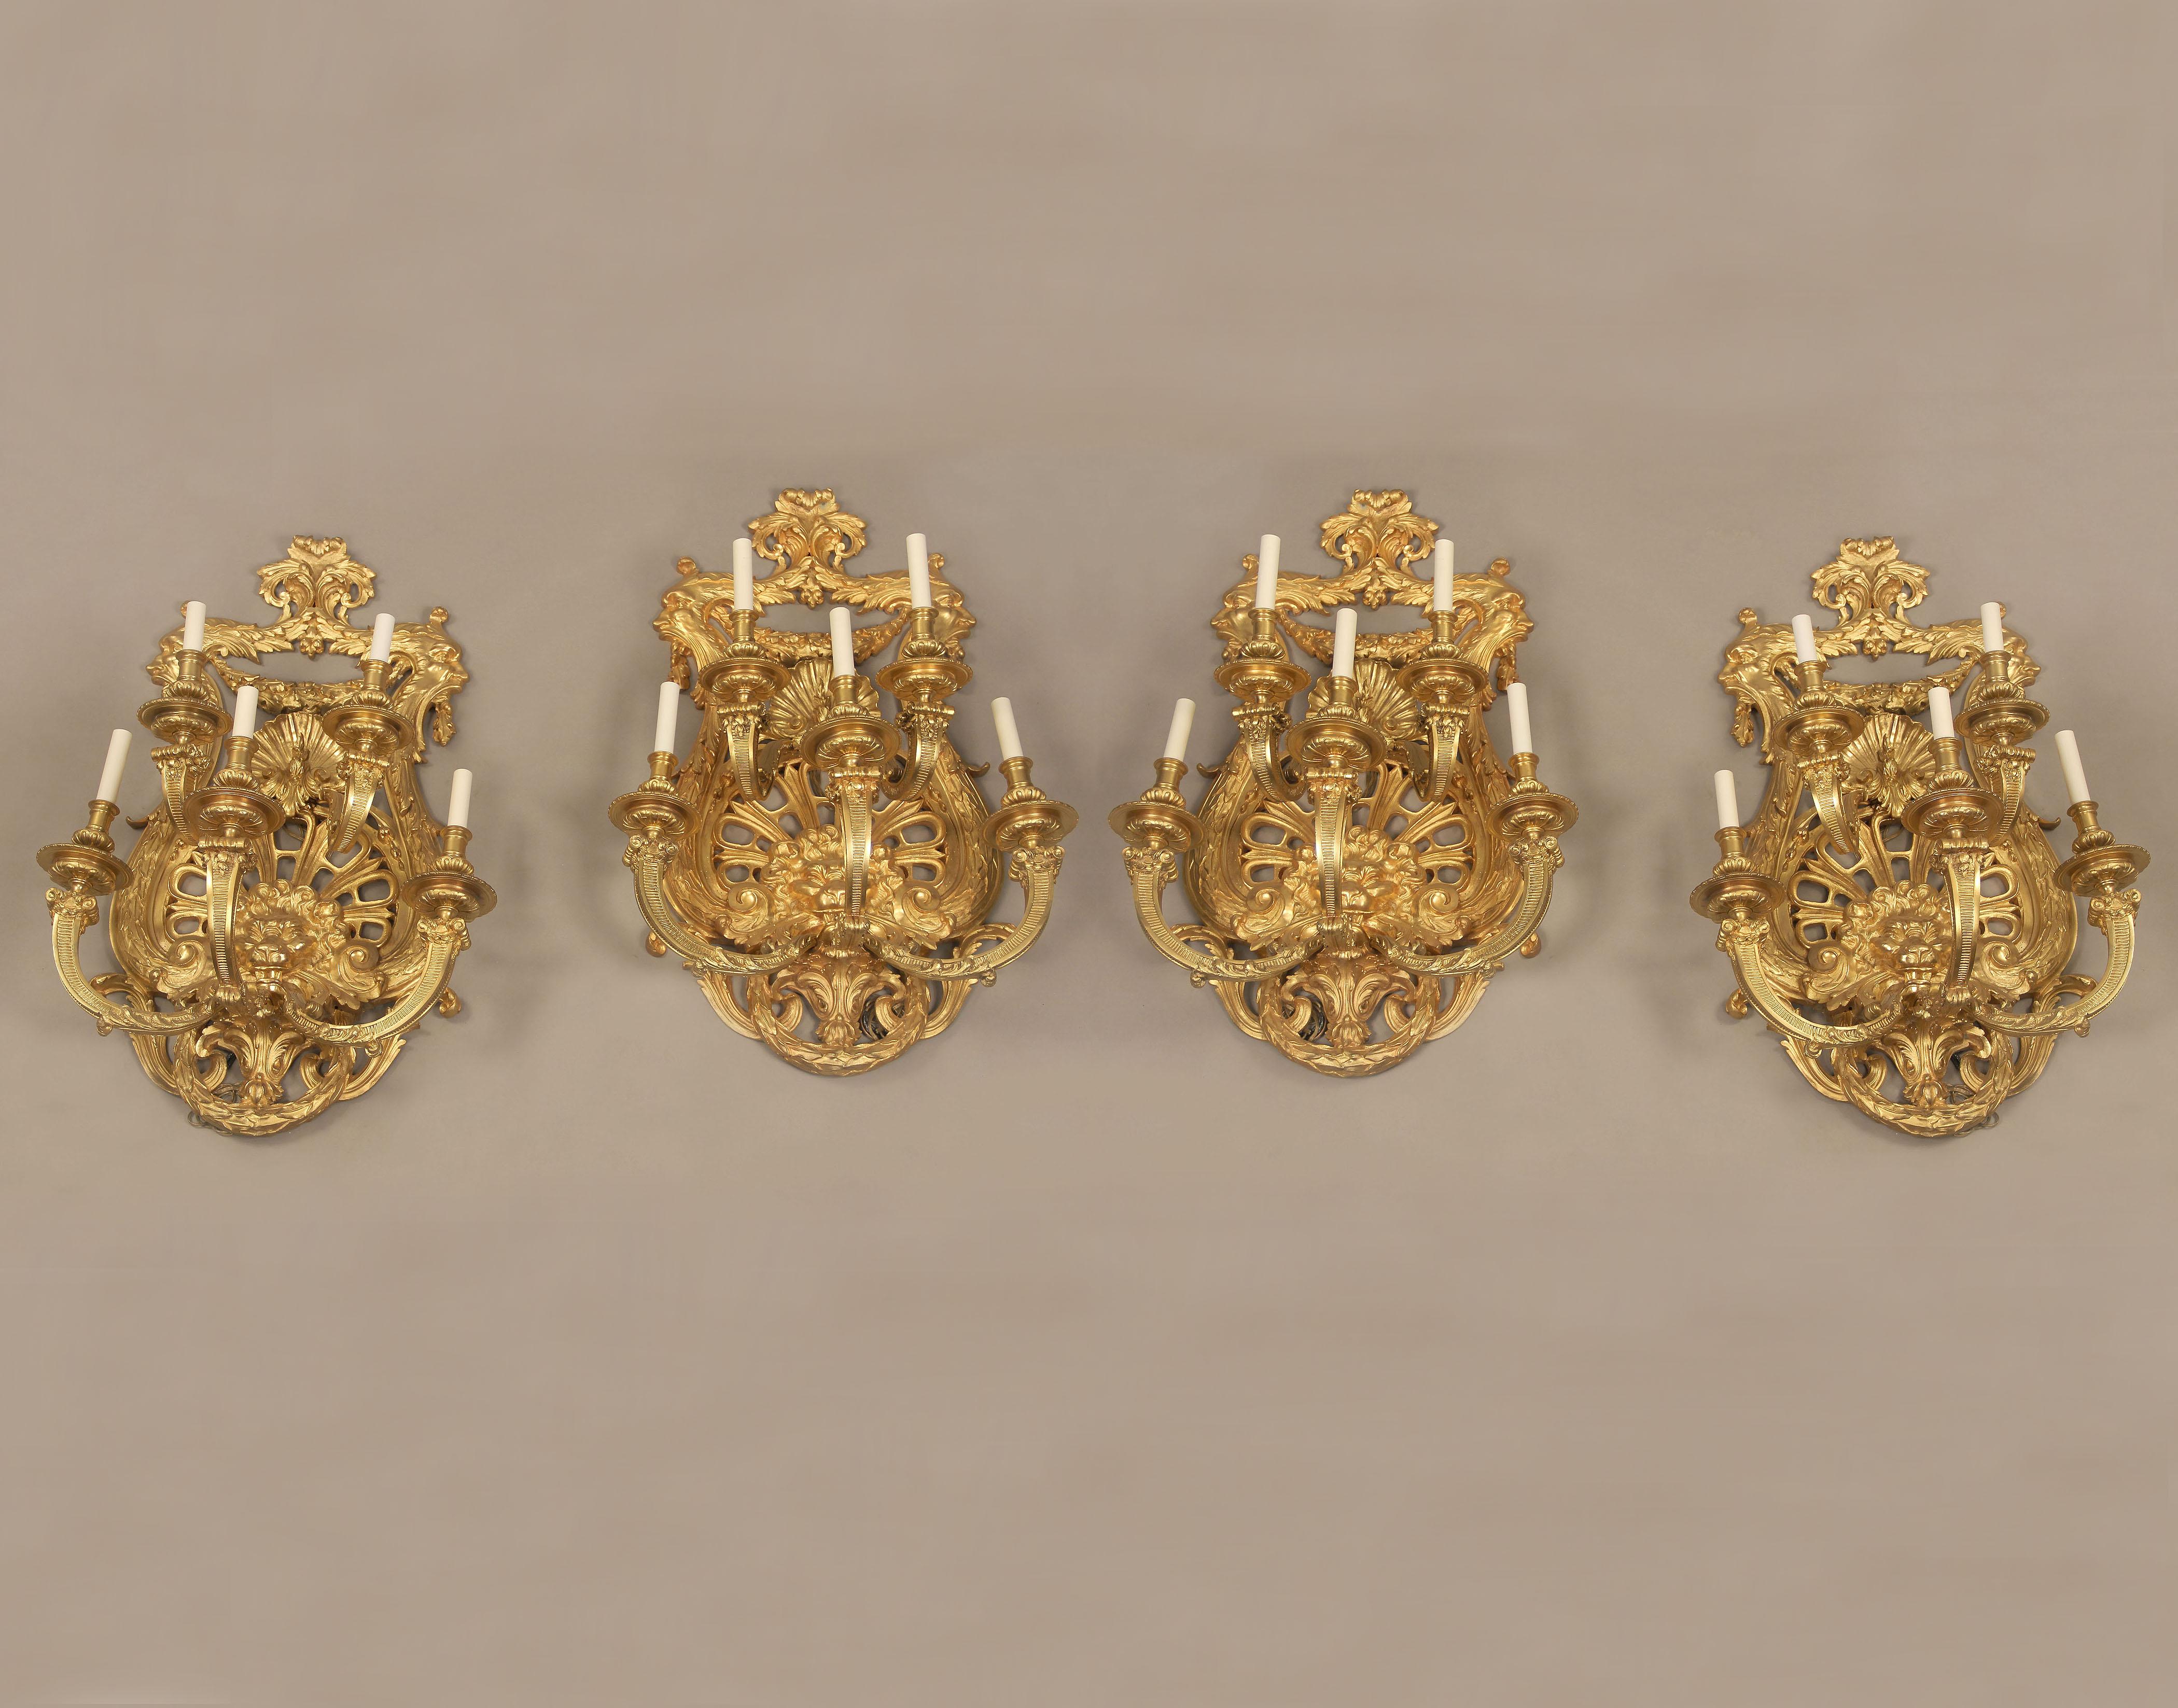 A fine set of four important late 19th century gilt bronze five-light sconces

Heavily chiseled gilt bronze frames decorated with mens faces and a sea shell, centered by a lions mask with five tiered lights.

If you are looking for a chandelier,